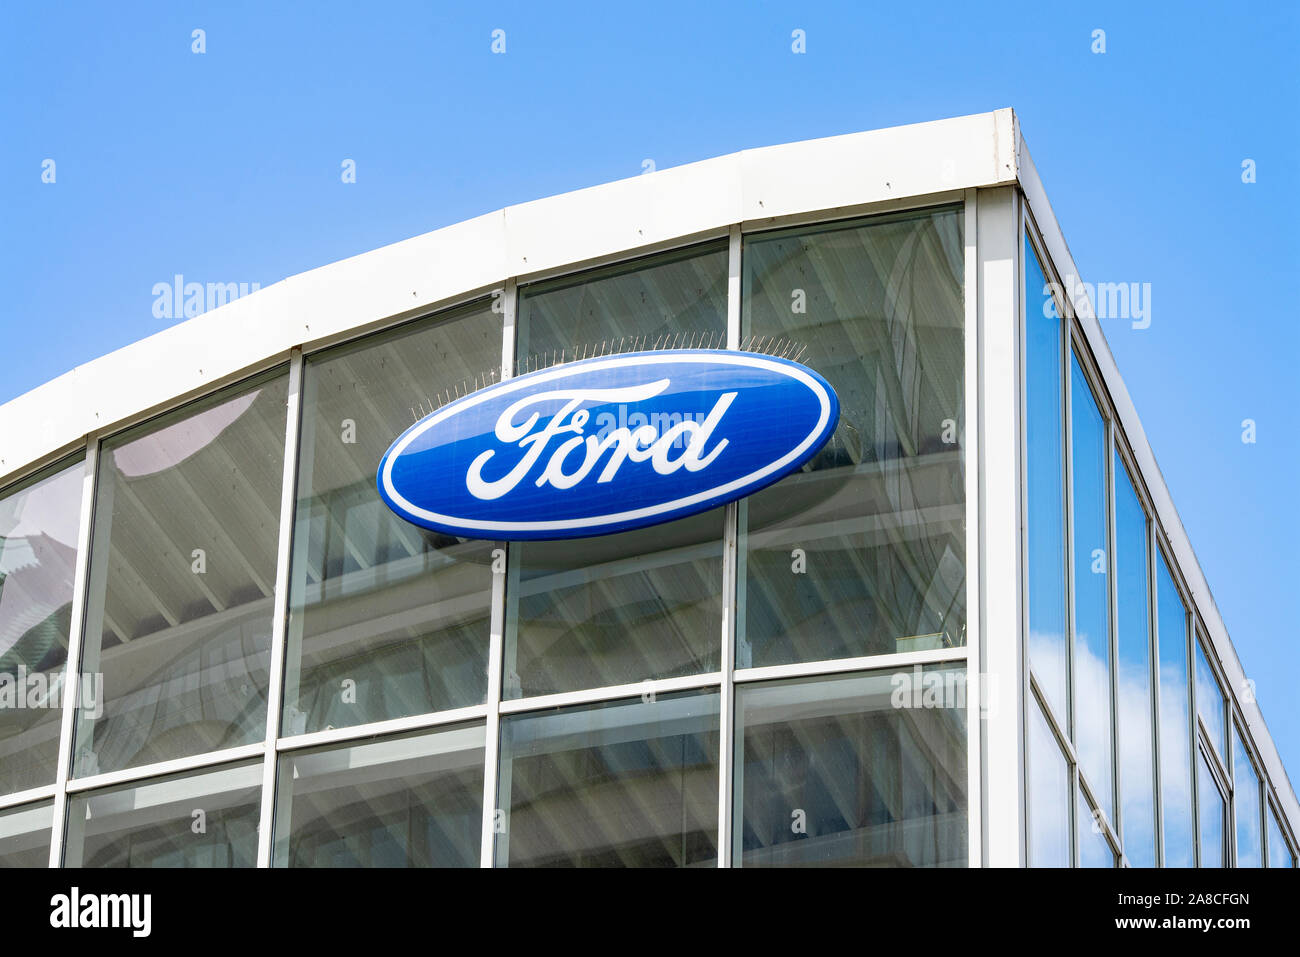 Ford logo on the glass facade of a car dealership Stock Photo